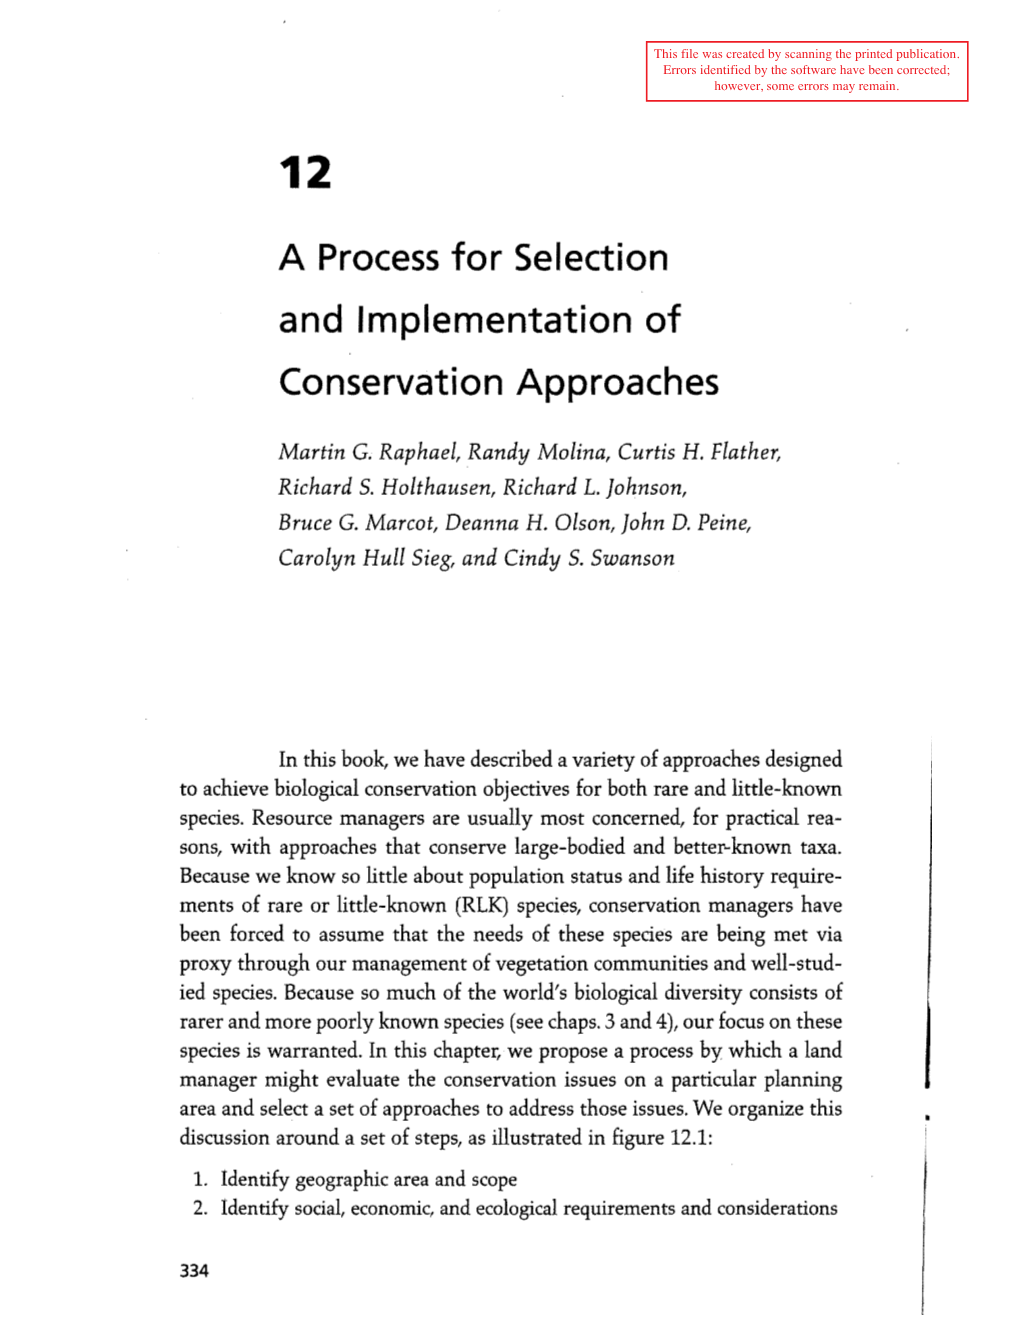 A Process for Selection and Implementation of Conservation Approaches